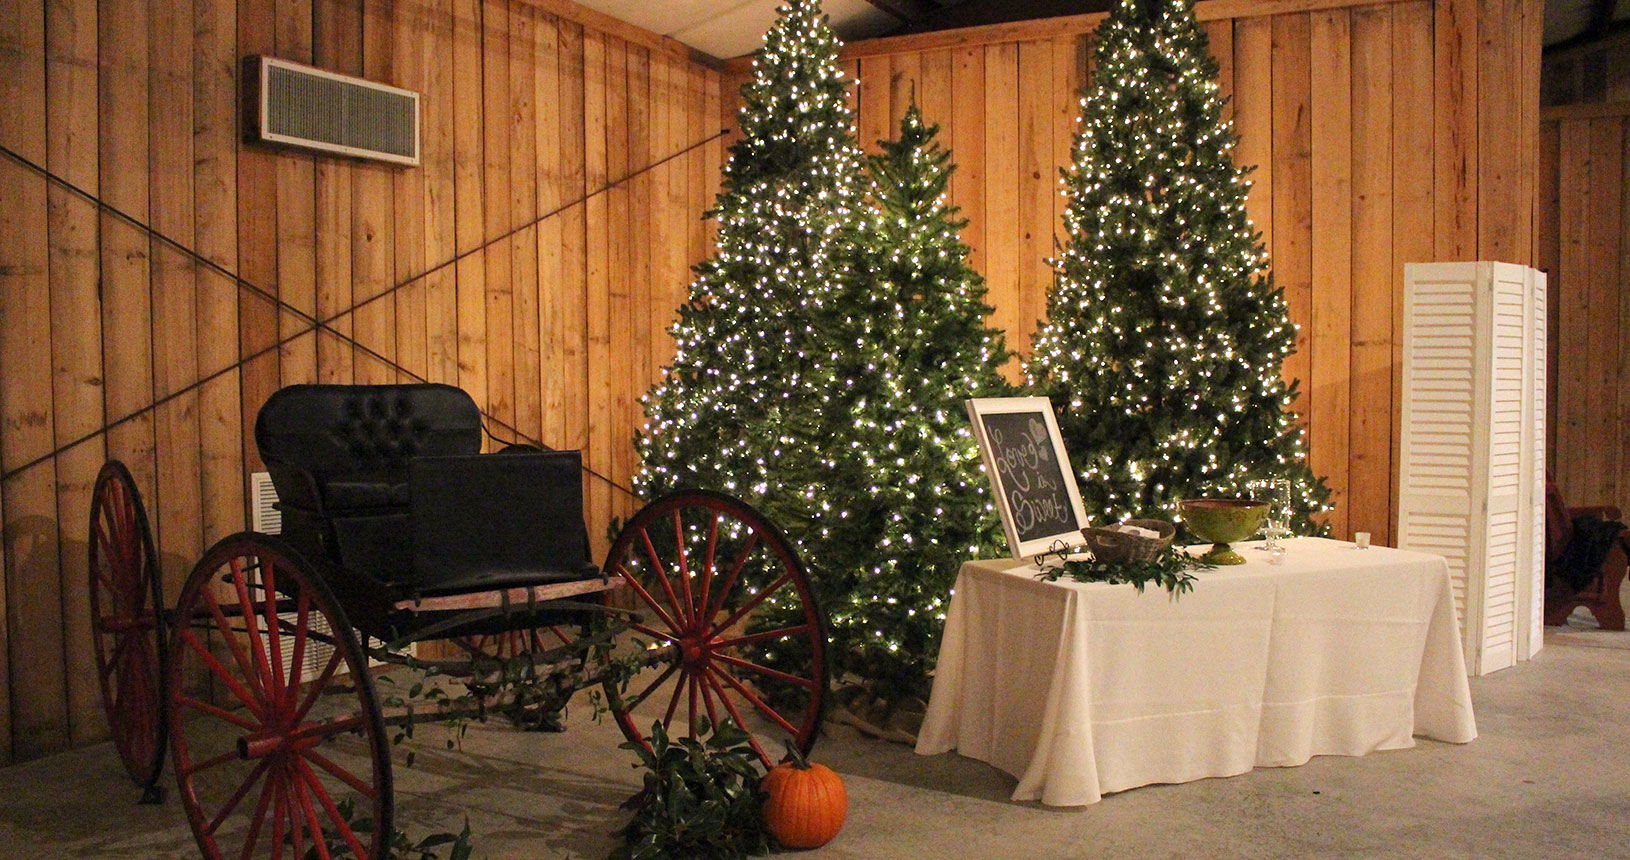 A room with two christmas trees and a wagon wheel.